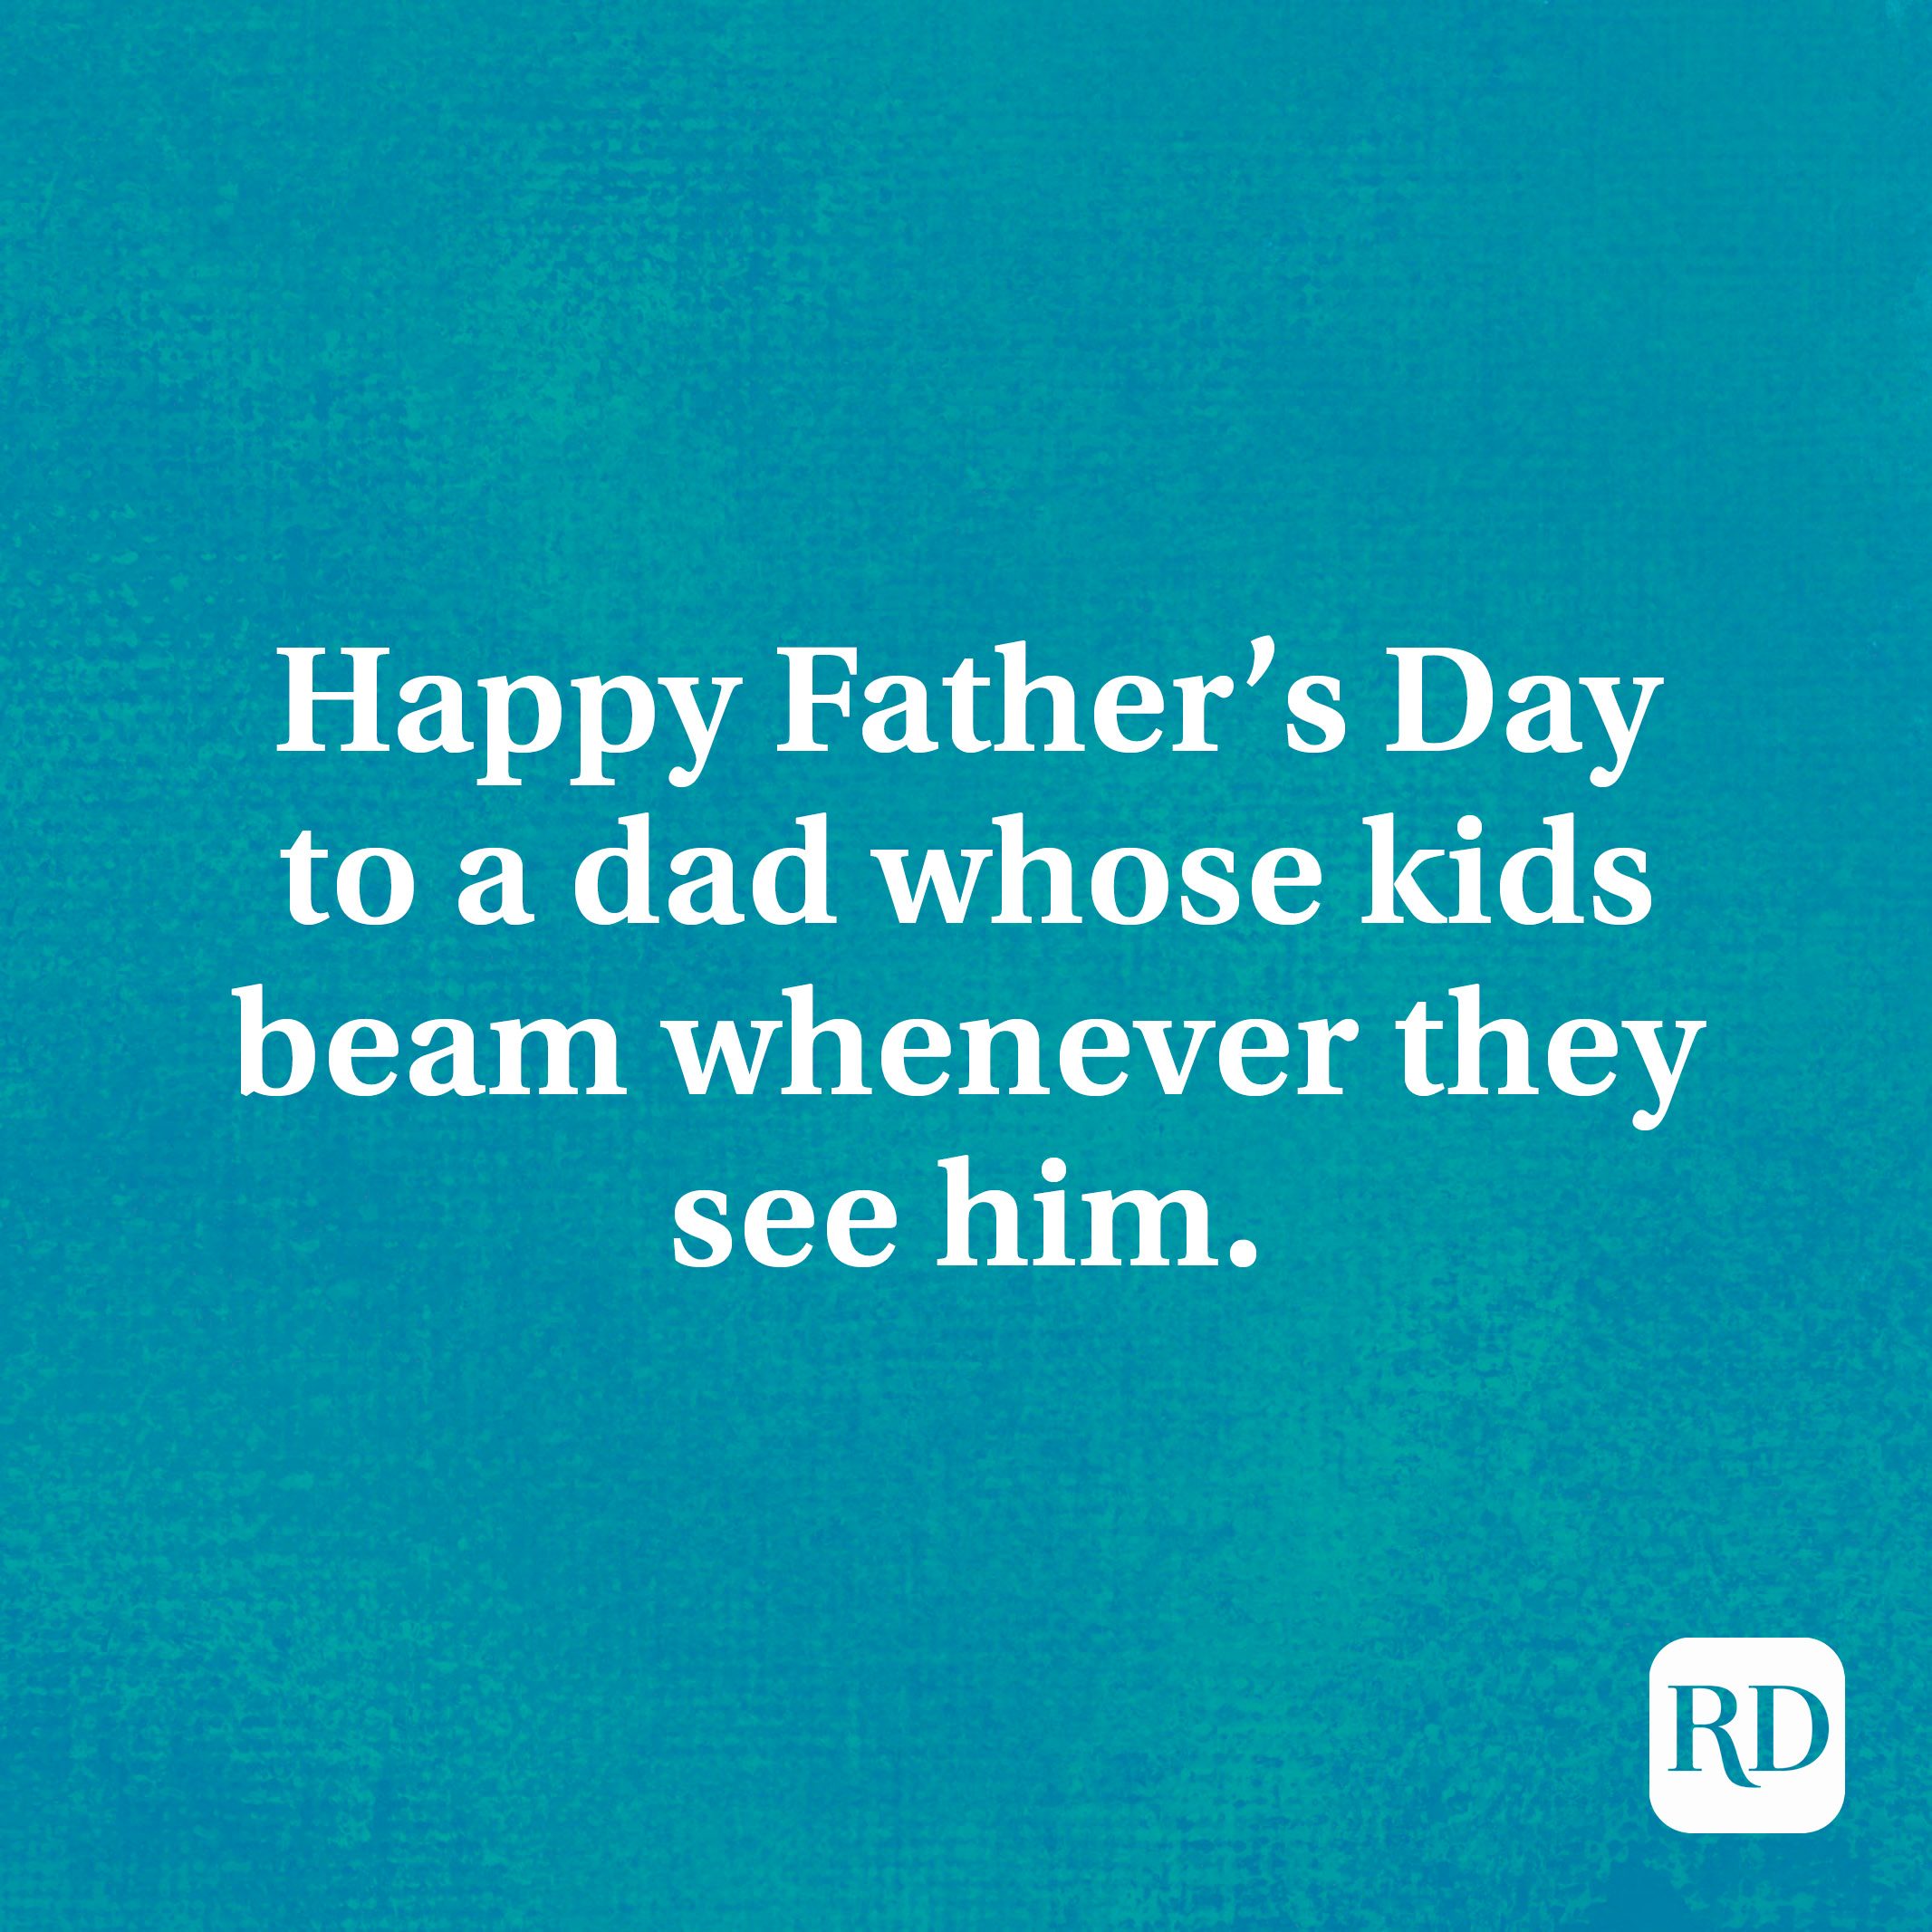 Whose day is Father's Day?